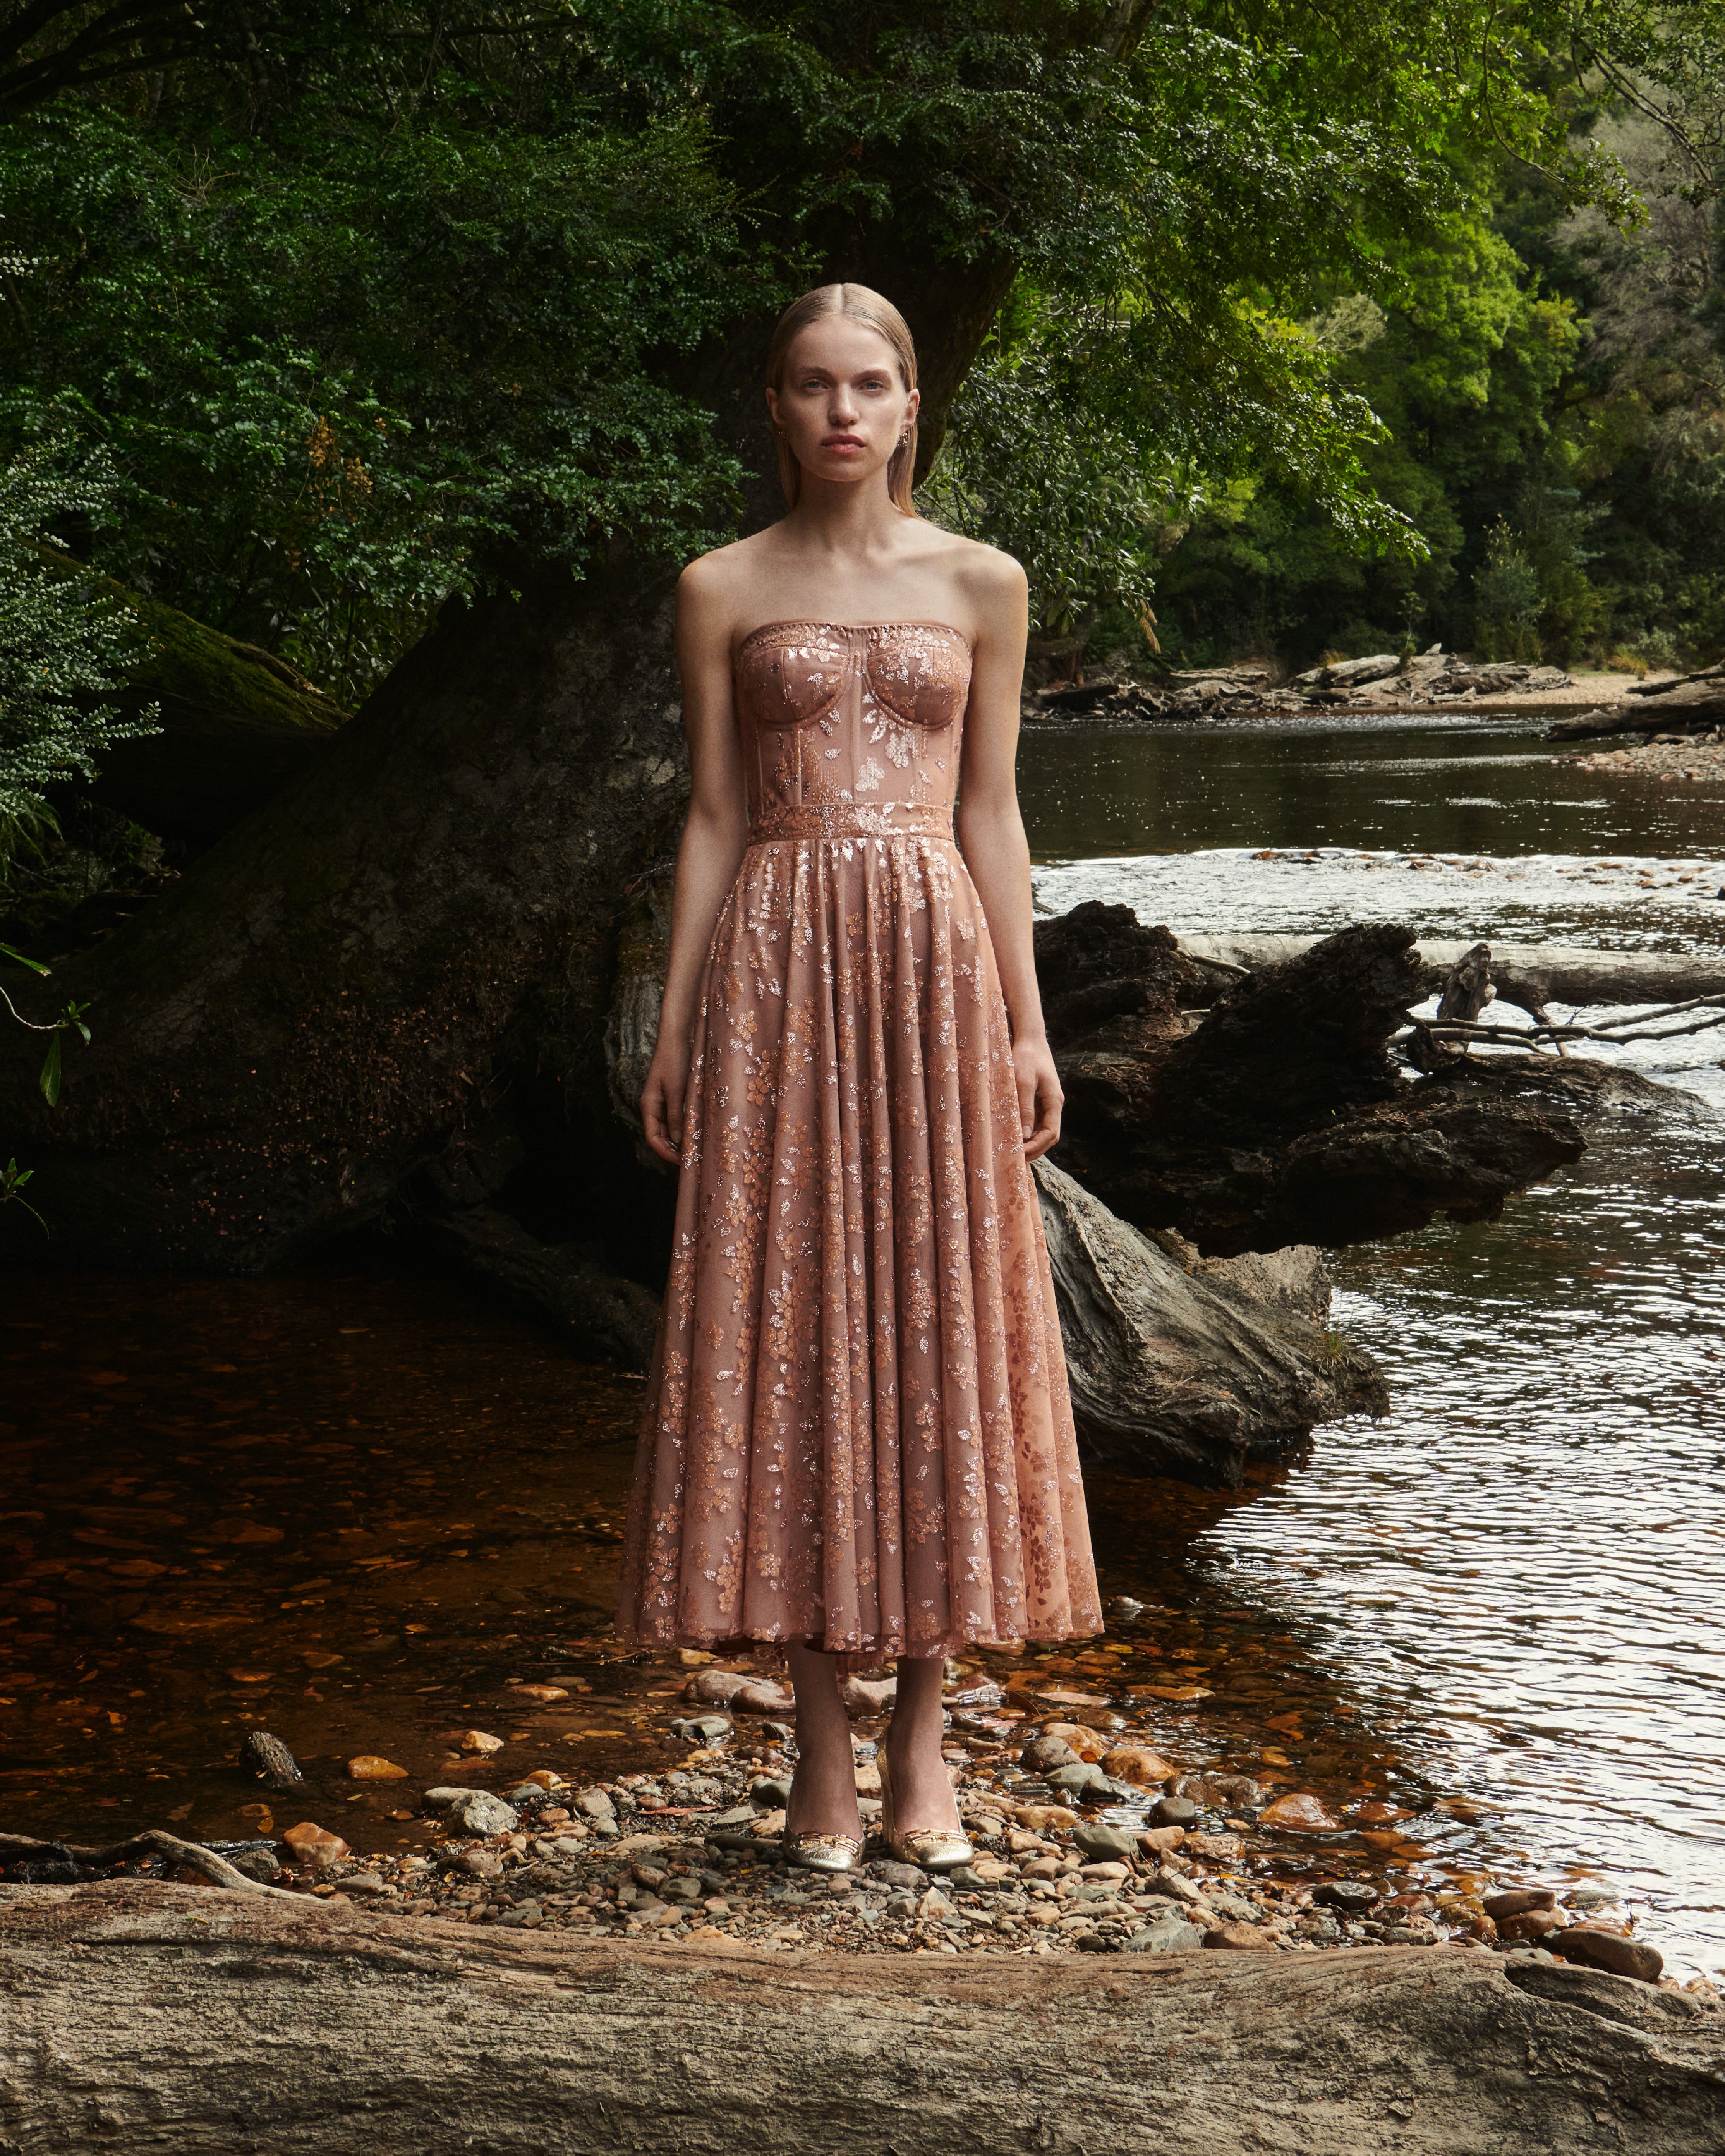 Two images side-by-side of Sabine Glud wearing a shimmery apricot bustier and skirt sitting in the forest (left) and standing by the river (right)